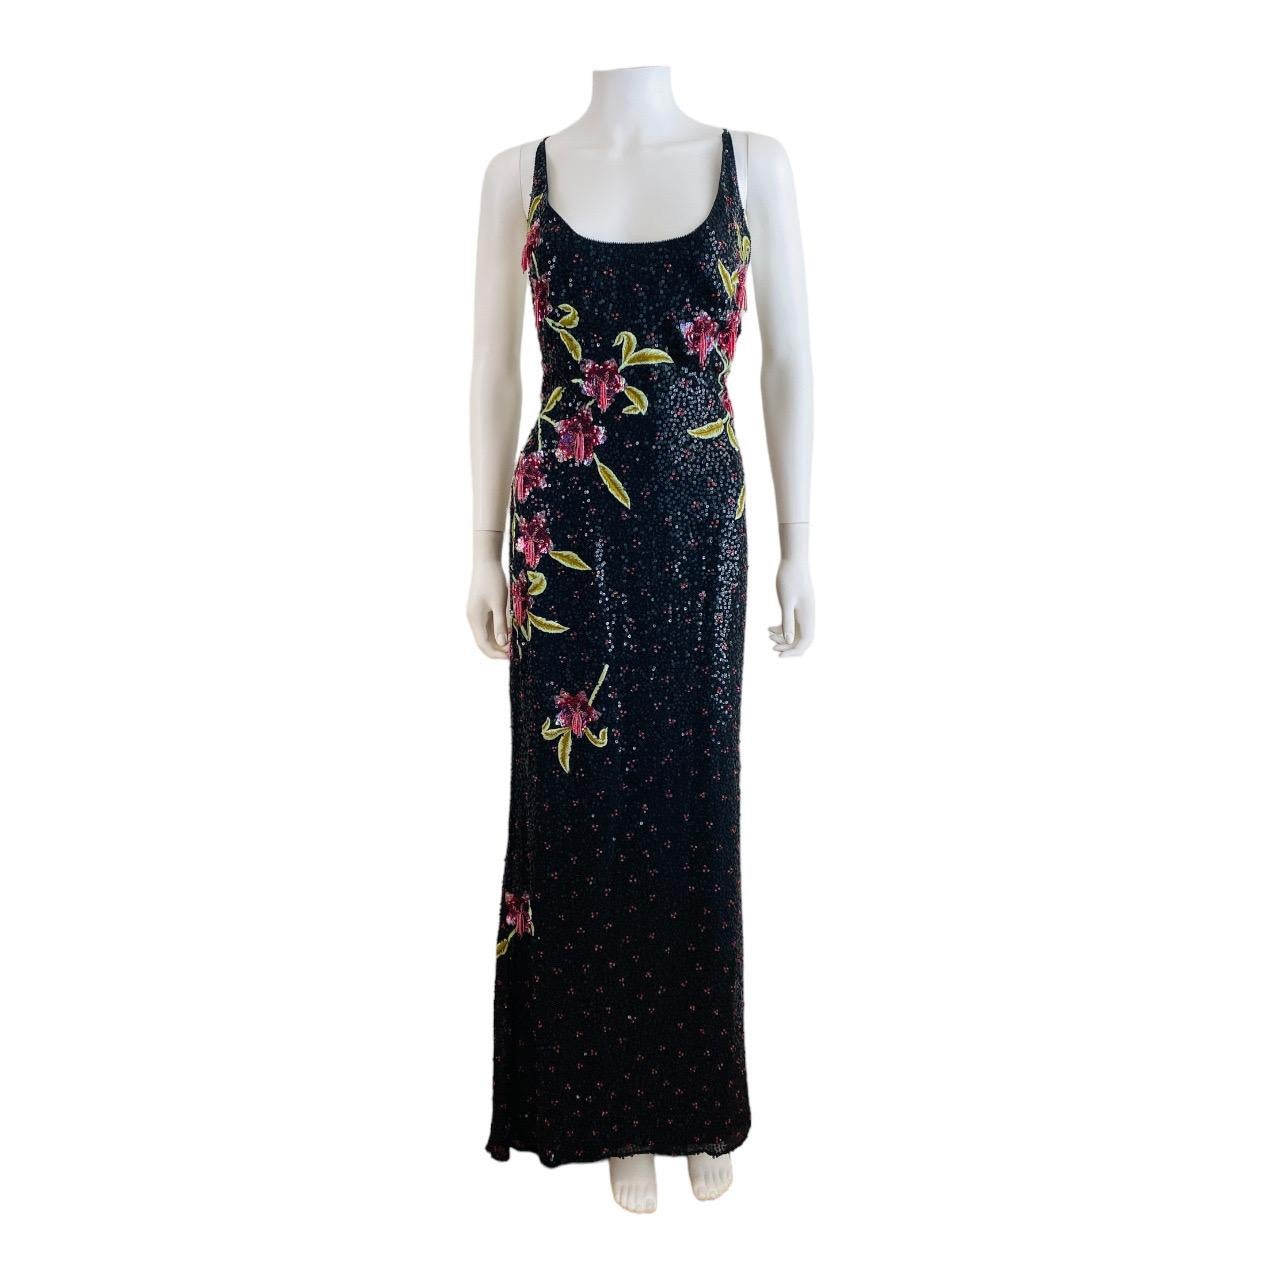 Stunning 2002 Escada dress gown (shown pinned in front picture)
Black silk fabric covered in hand beaded mini black sequins w/embroidered leaves + sequin + beaded flowers throughout
Thin shoulder straps
Scooped neckline
Fitted style
Column style